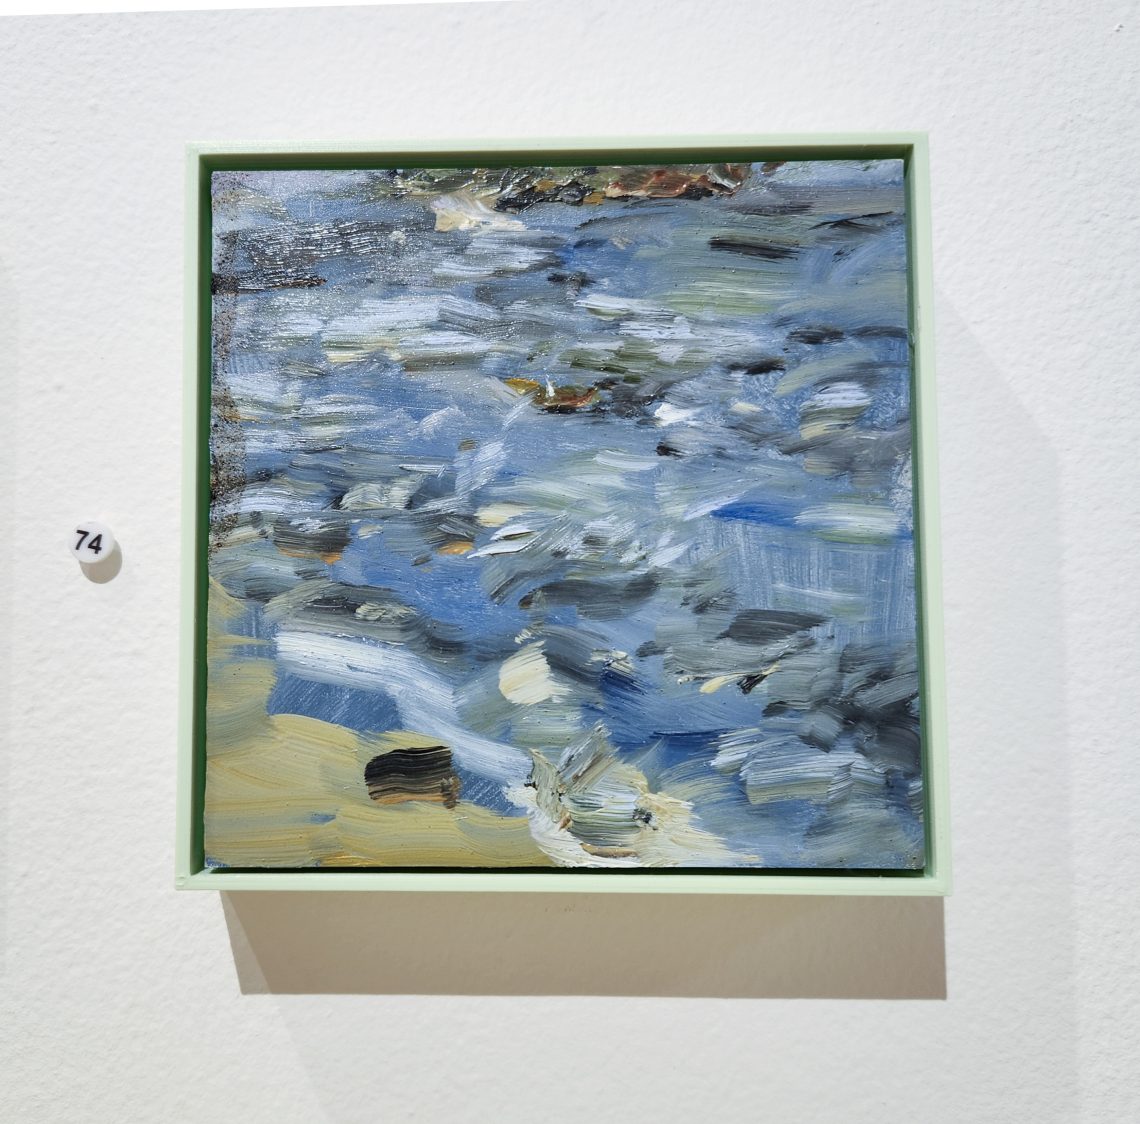 Kristin Golden "Willard Ocean Interaction," 2022. Oil paint, 6 ½ in. x 6 ½ in. Part of the "2023 Bachelor of Fine Arts and Bachelor of Arts Exhibition," University of Southern Maine Art Gallery.